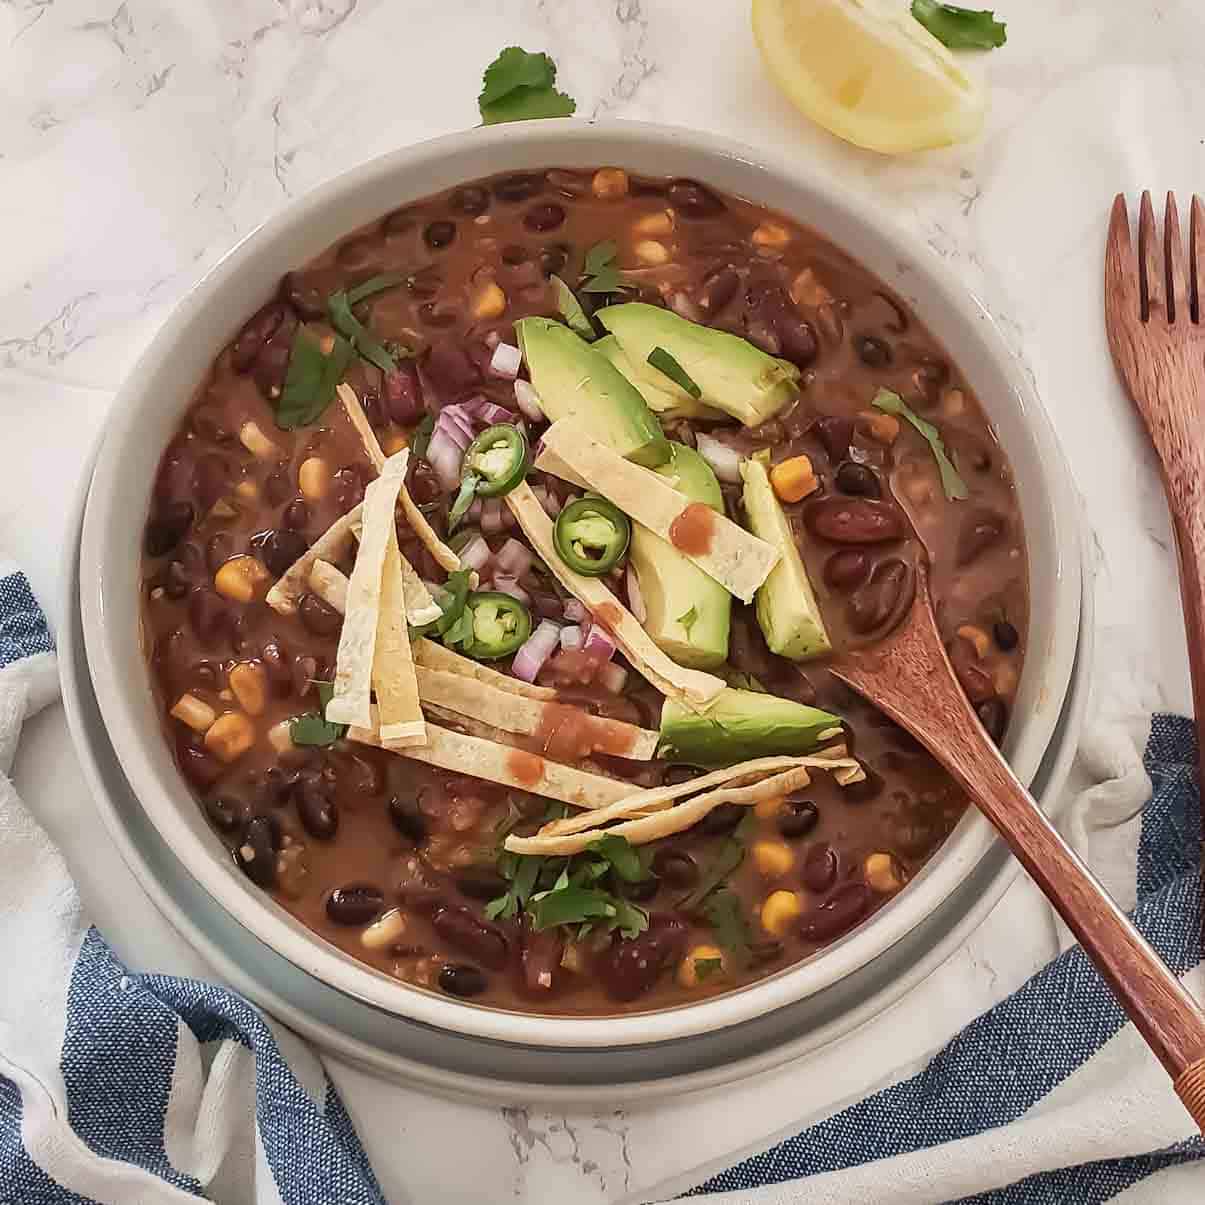 A bowl full of hearty comforting Vegetarian chili recipe with beans. This earthy comfort food makes excellent one pot meal.